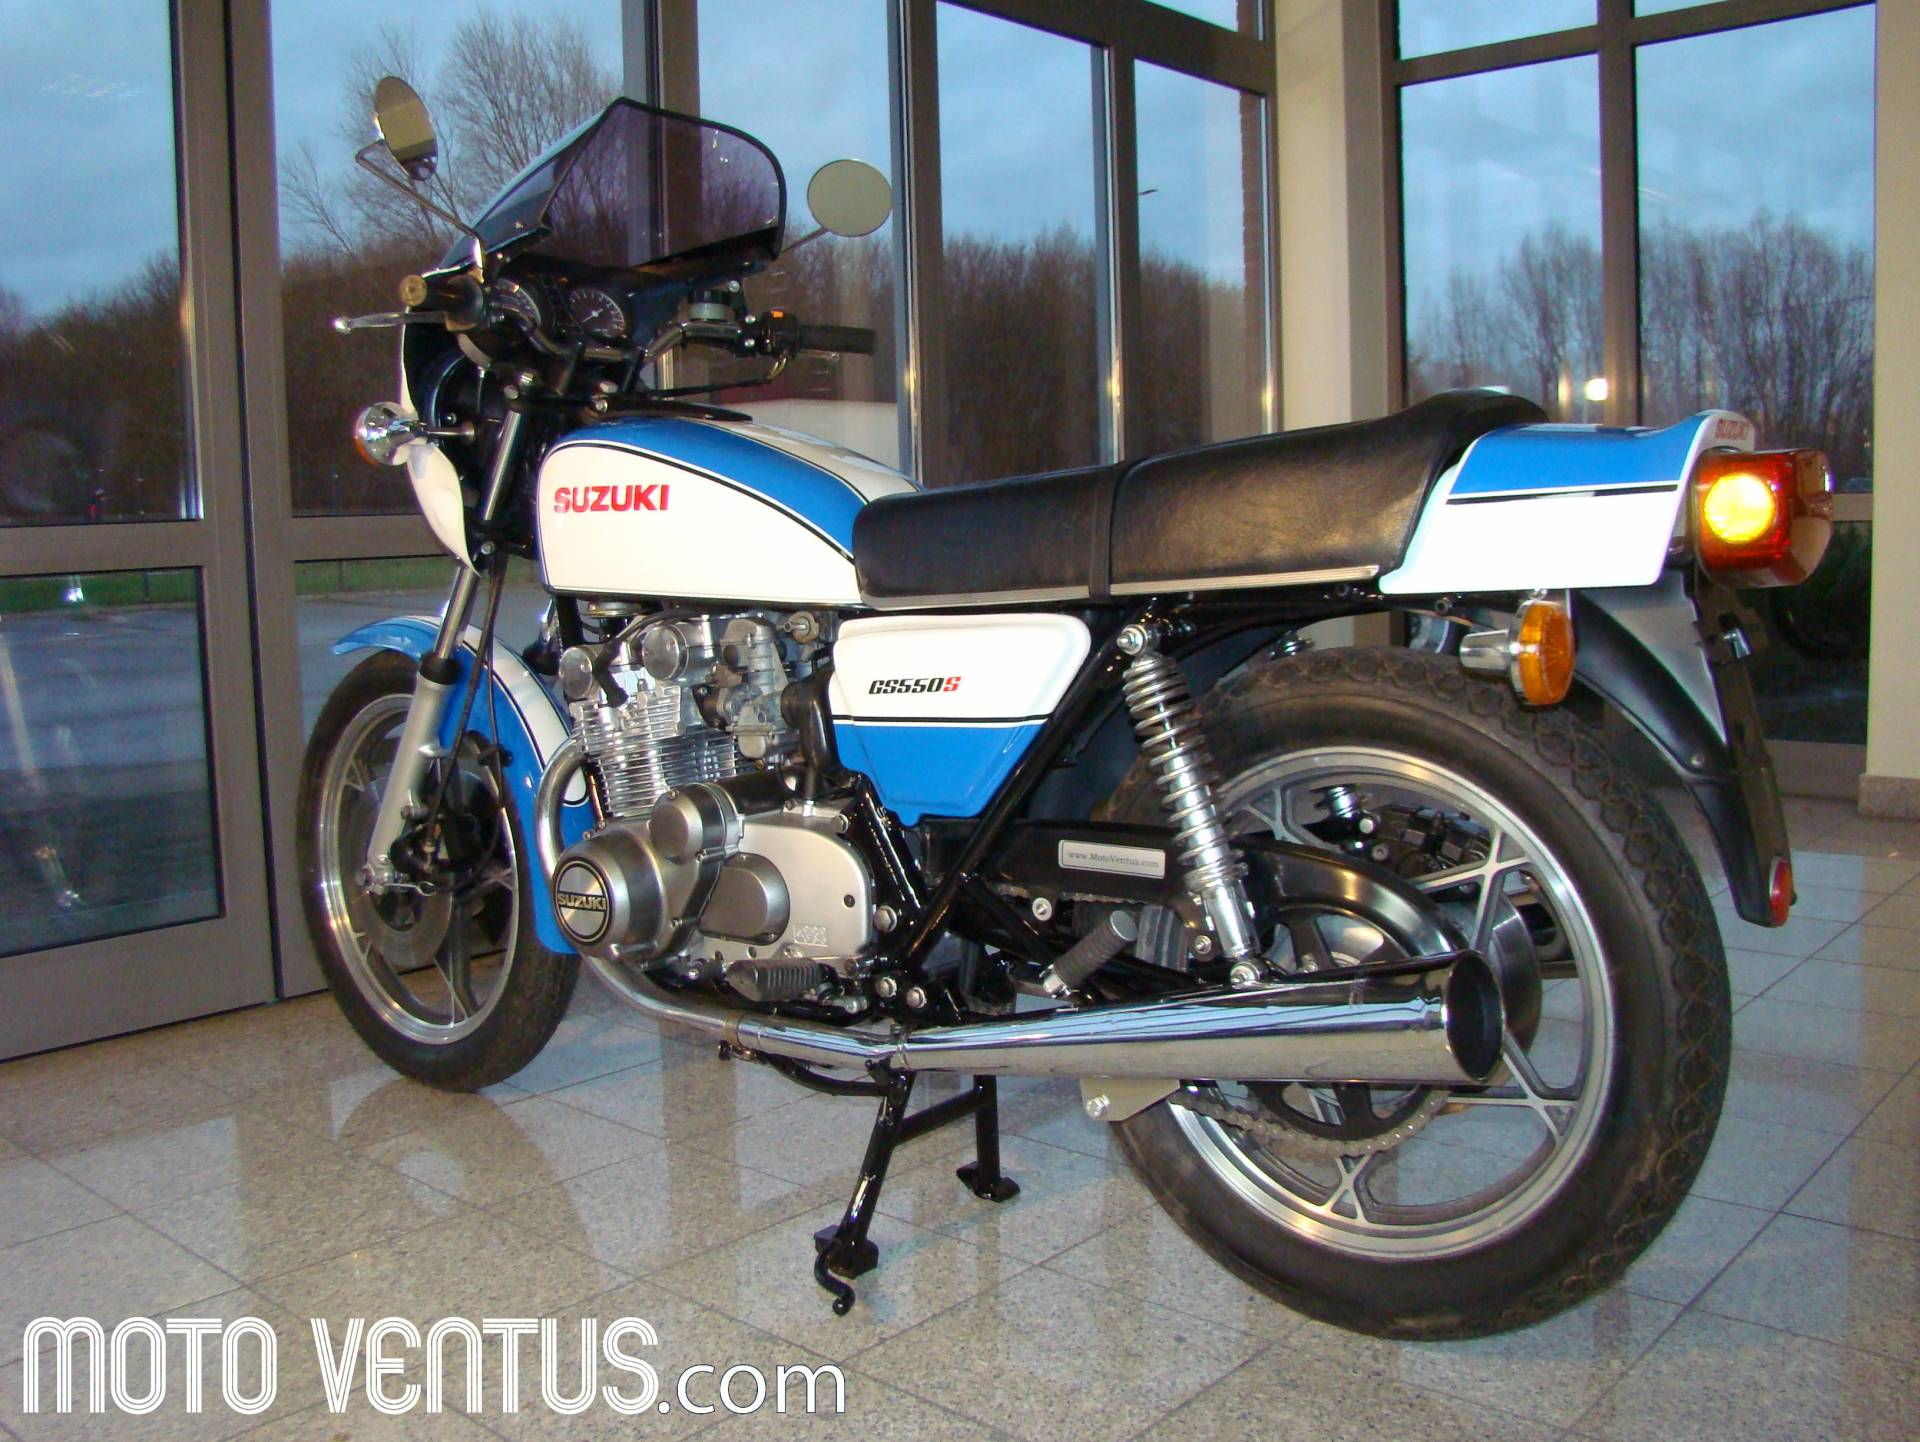 For Sale Suzuki GS 500E (1984) offered for GBP 3,644